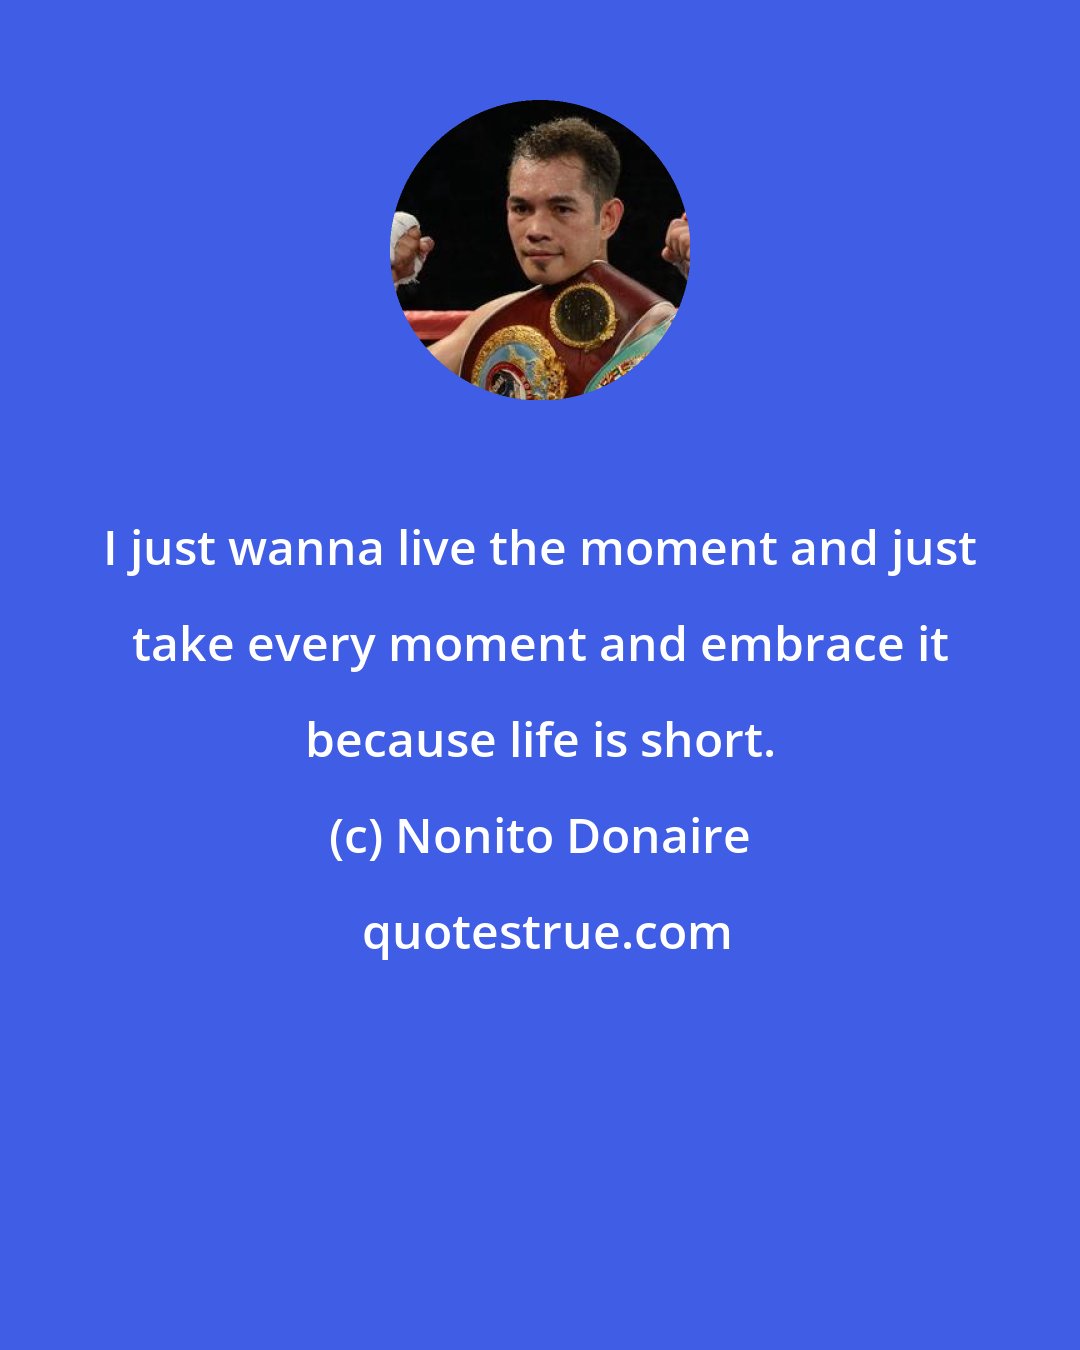 Nonito Donaire: I just wanna live the moment and just take every moment and embrace it because life is short.